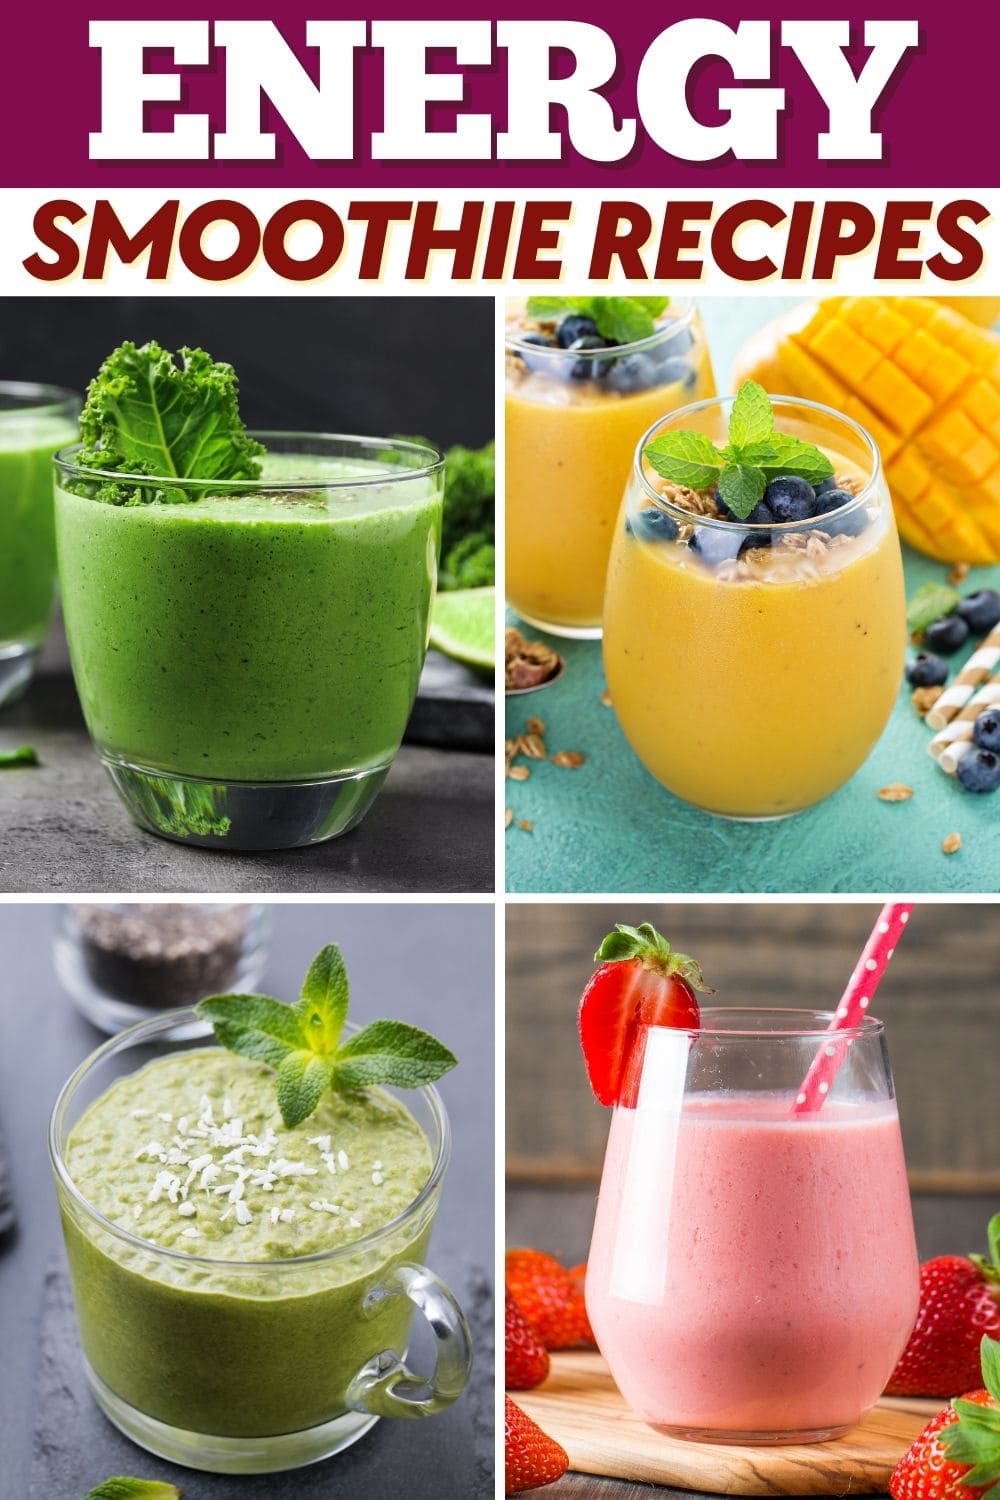 10 Healthy Energy Smoothie Recipes - Insanely Good